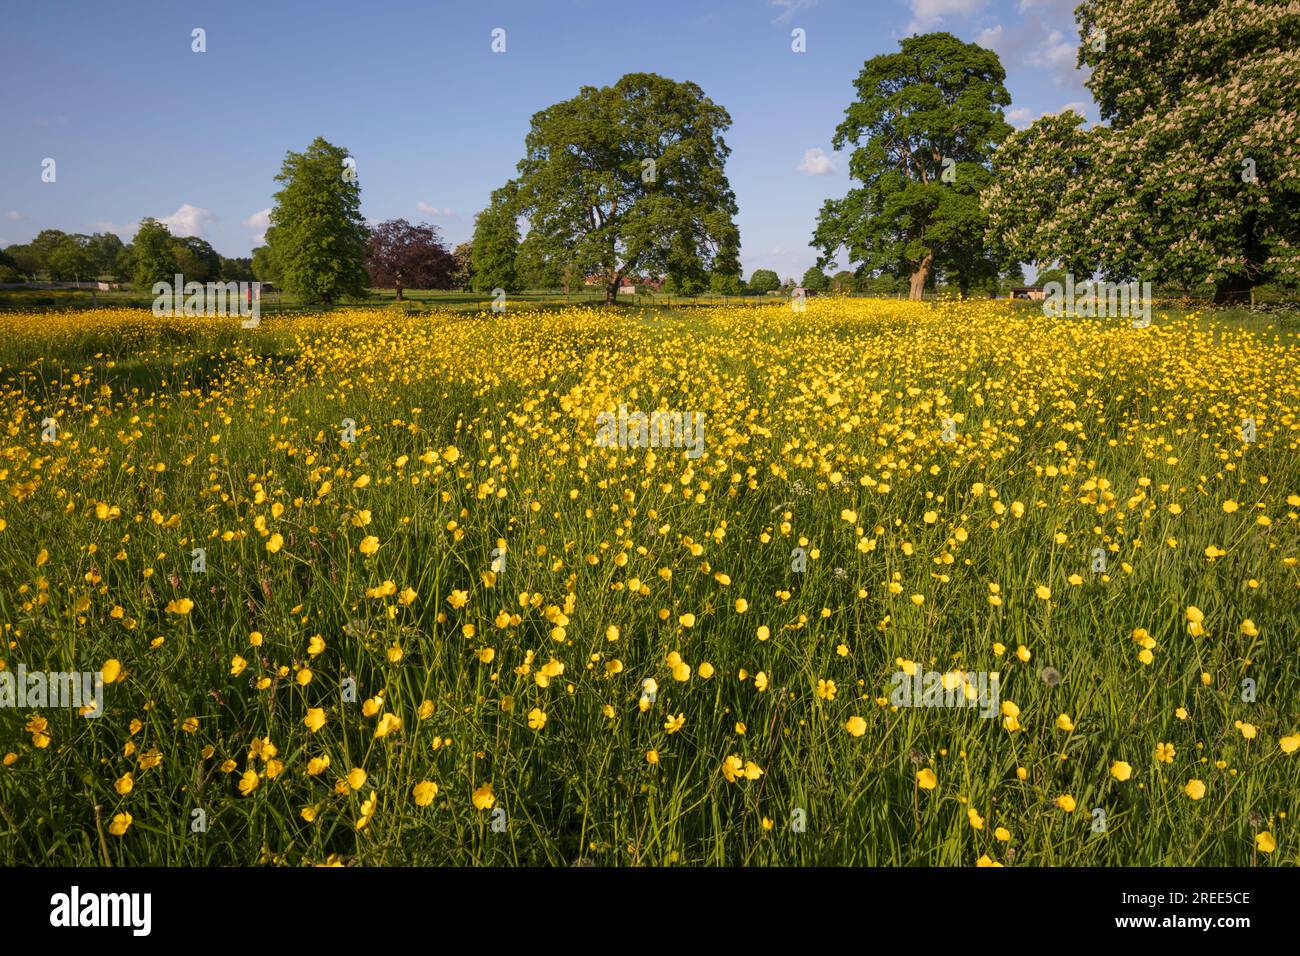 Yellow buttercups growing in wild flower meadow with oak trees and blue sky, Newbury, Berkshire, England, United Kingdom, Europe Stock Photo